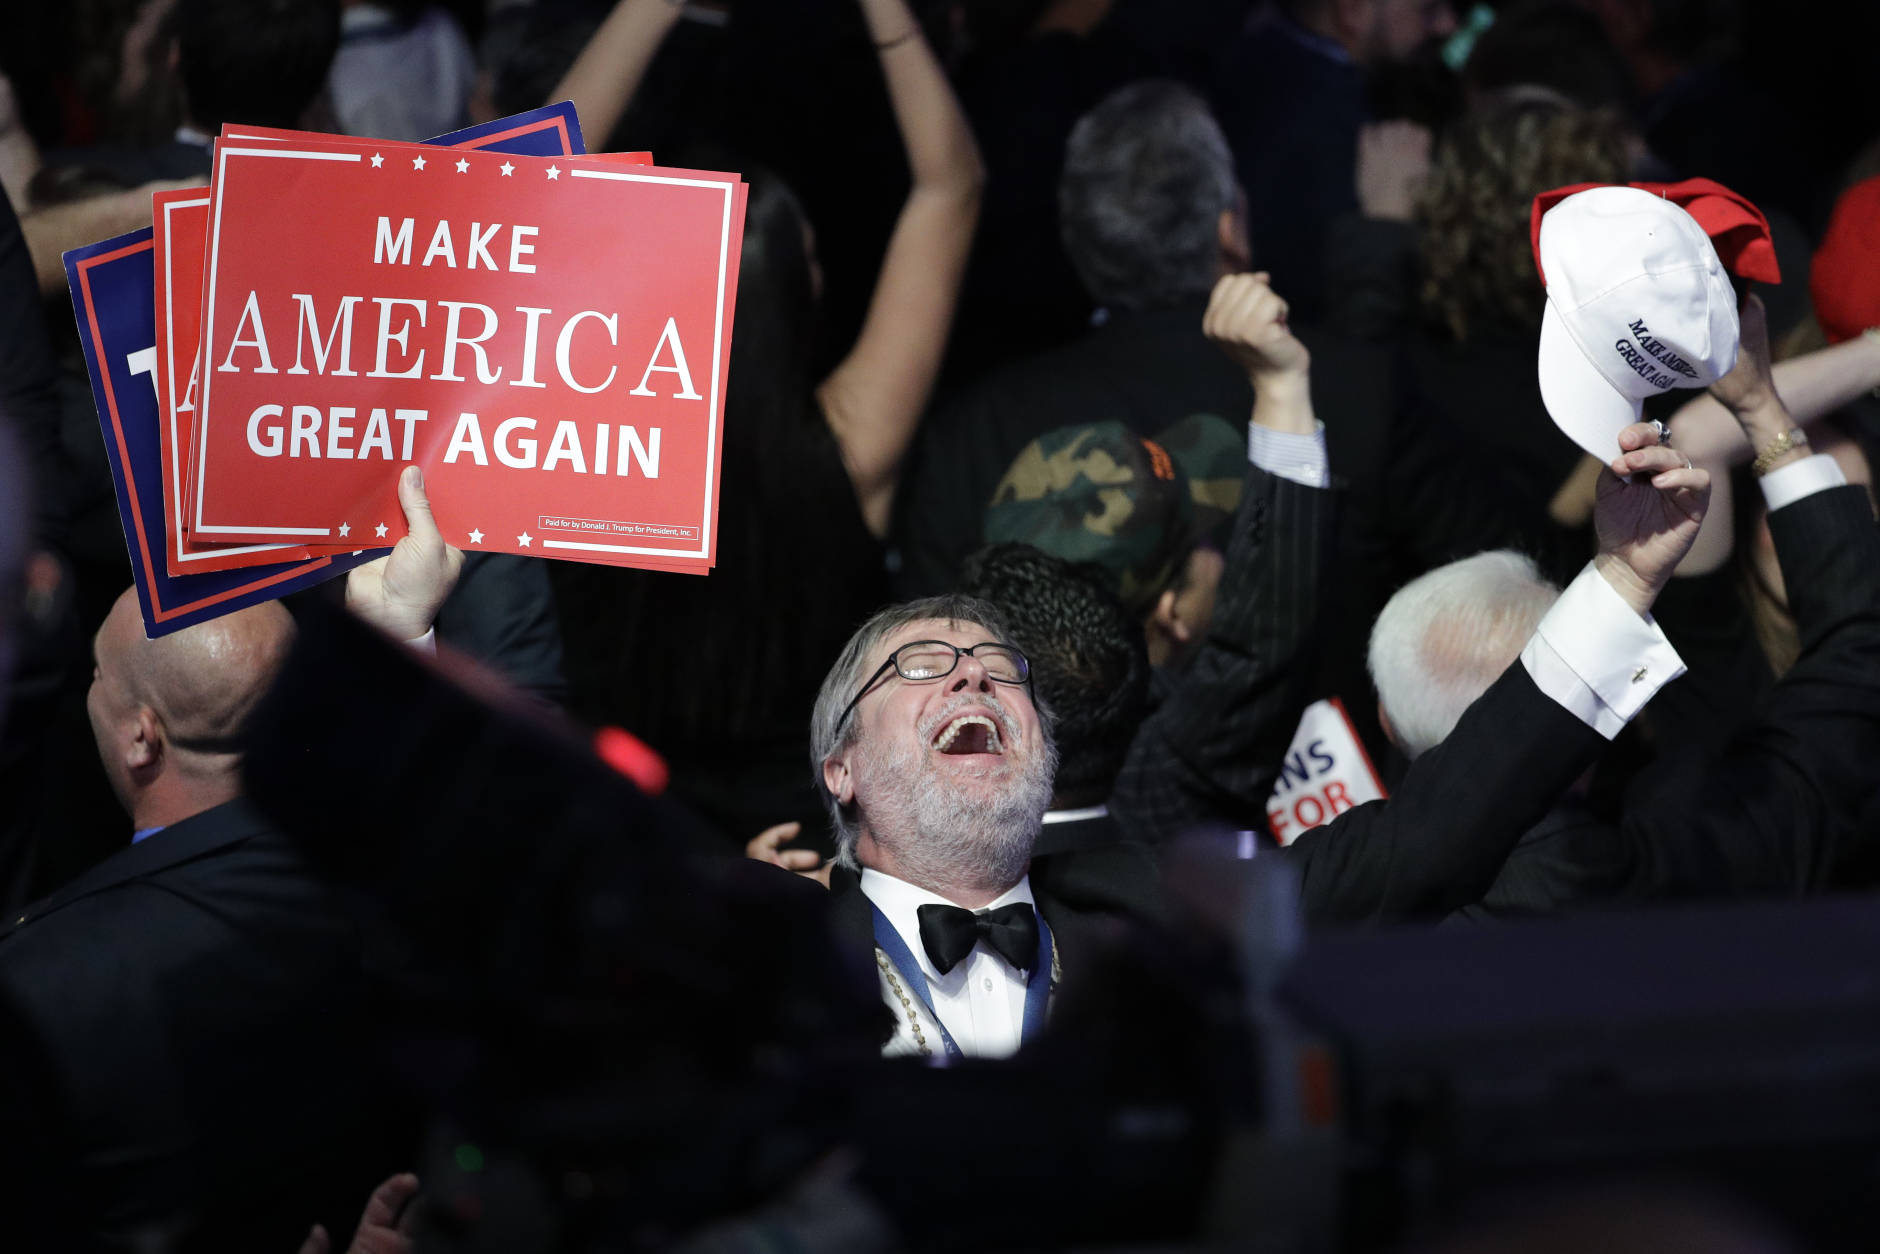 Supporters of Republican presidential candidate Donald Trump react as they watch the election results during Trump's election night rally, Tuesday, Nov. 8, 2016, in New York. (AP Photo/John Locher)